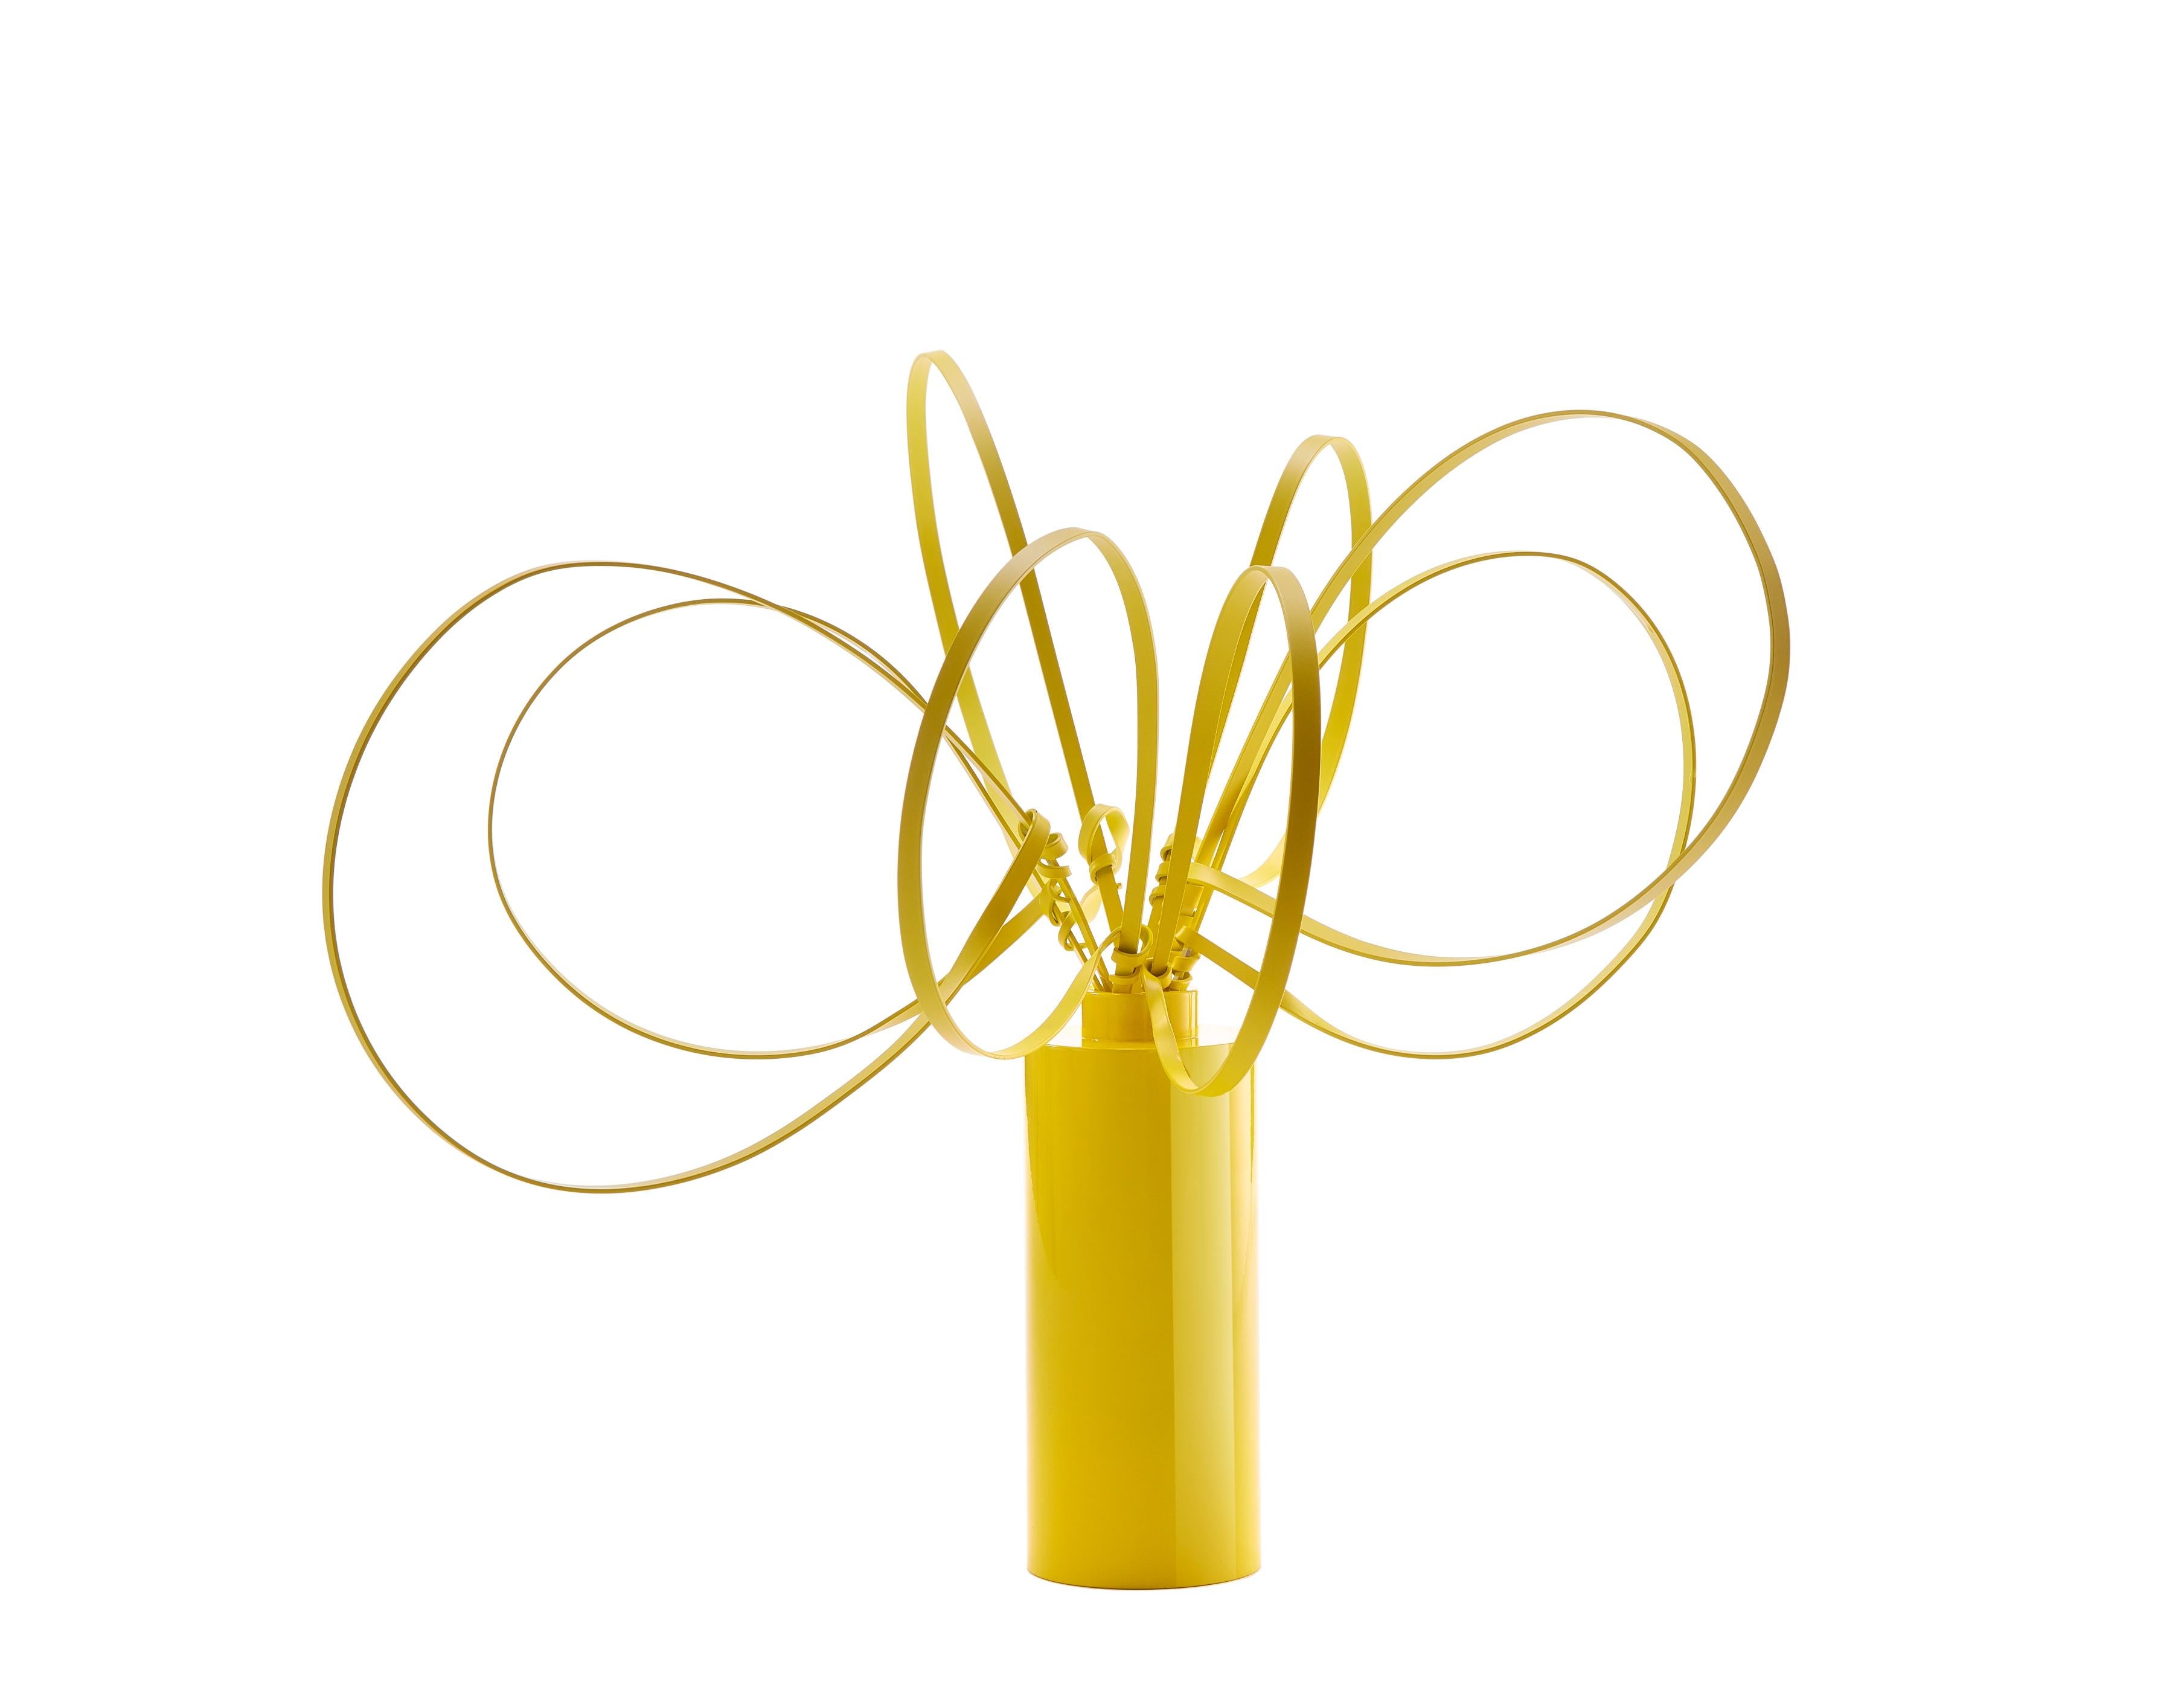 Tall sunshine swirls by Art Flower Maker
Unique piece.
Dimensions: Ø 58 x H 43cm.
Materials: powder coated bright yellow shiny / matte aluminium.

The artistic eye of The Art Flower Maker combined with Italian artisanal metalwork has brought to life